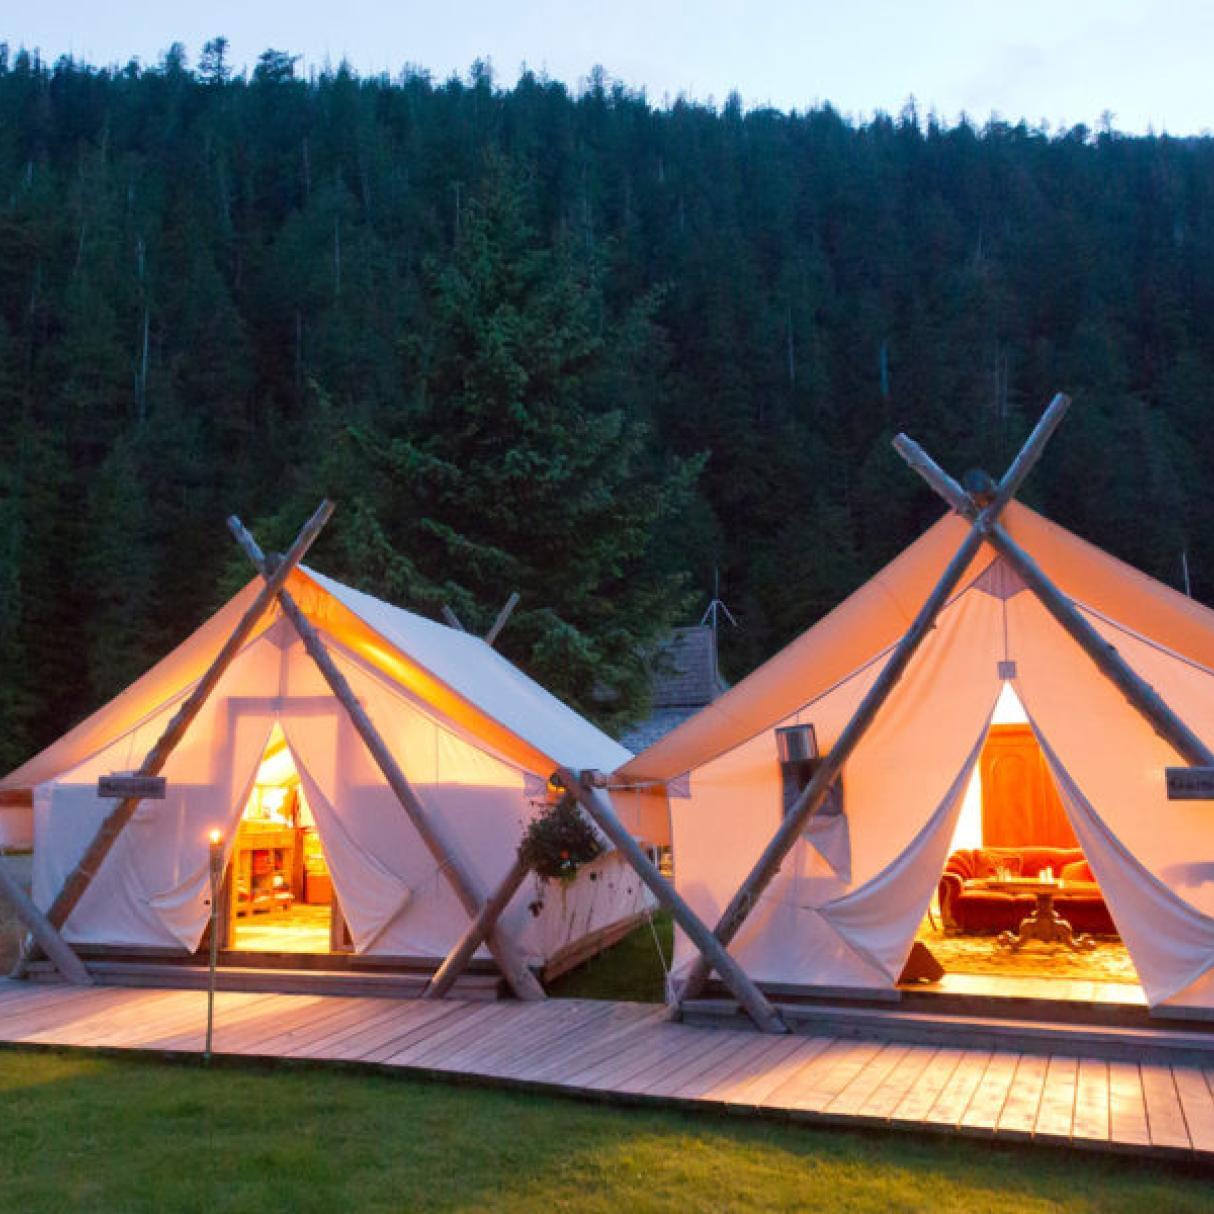 Two tents sit beside each other in a forest, warm light illuminates the interiors. 